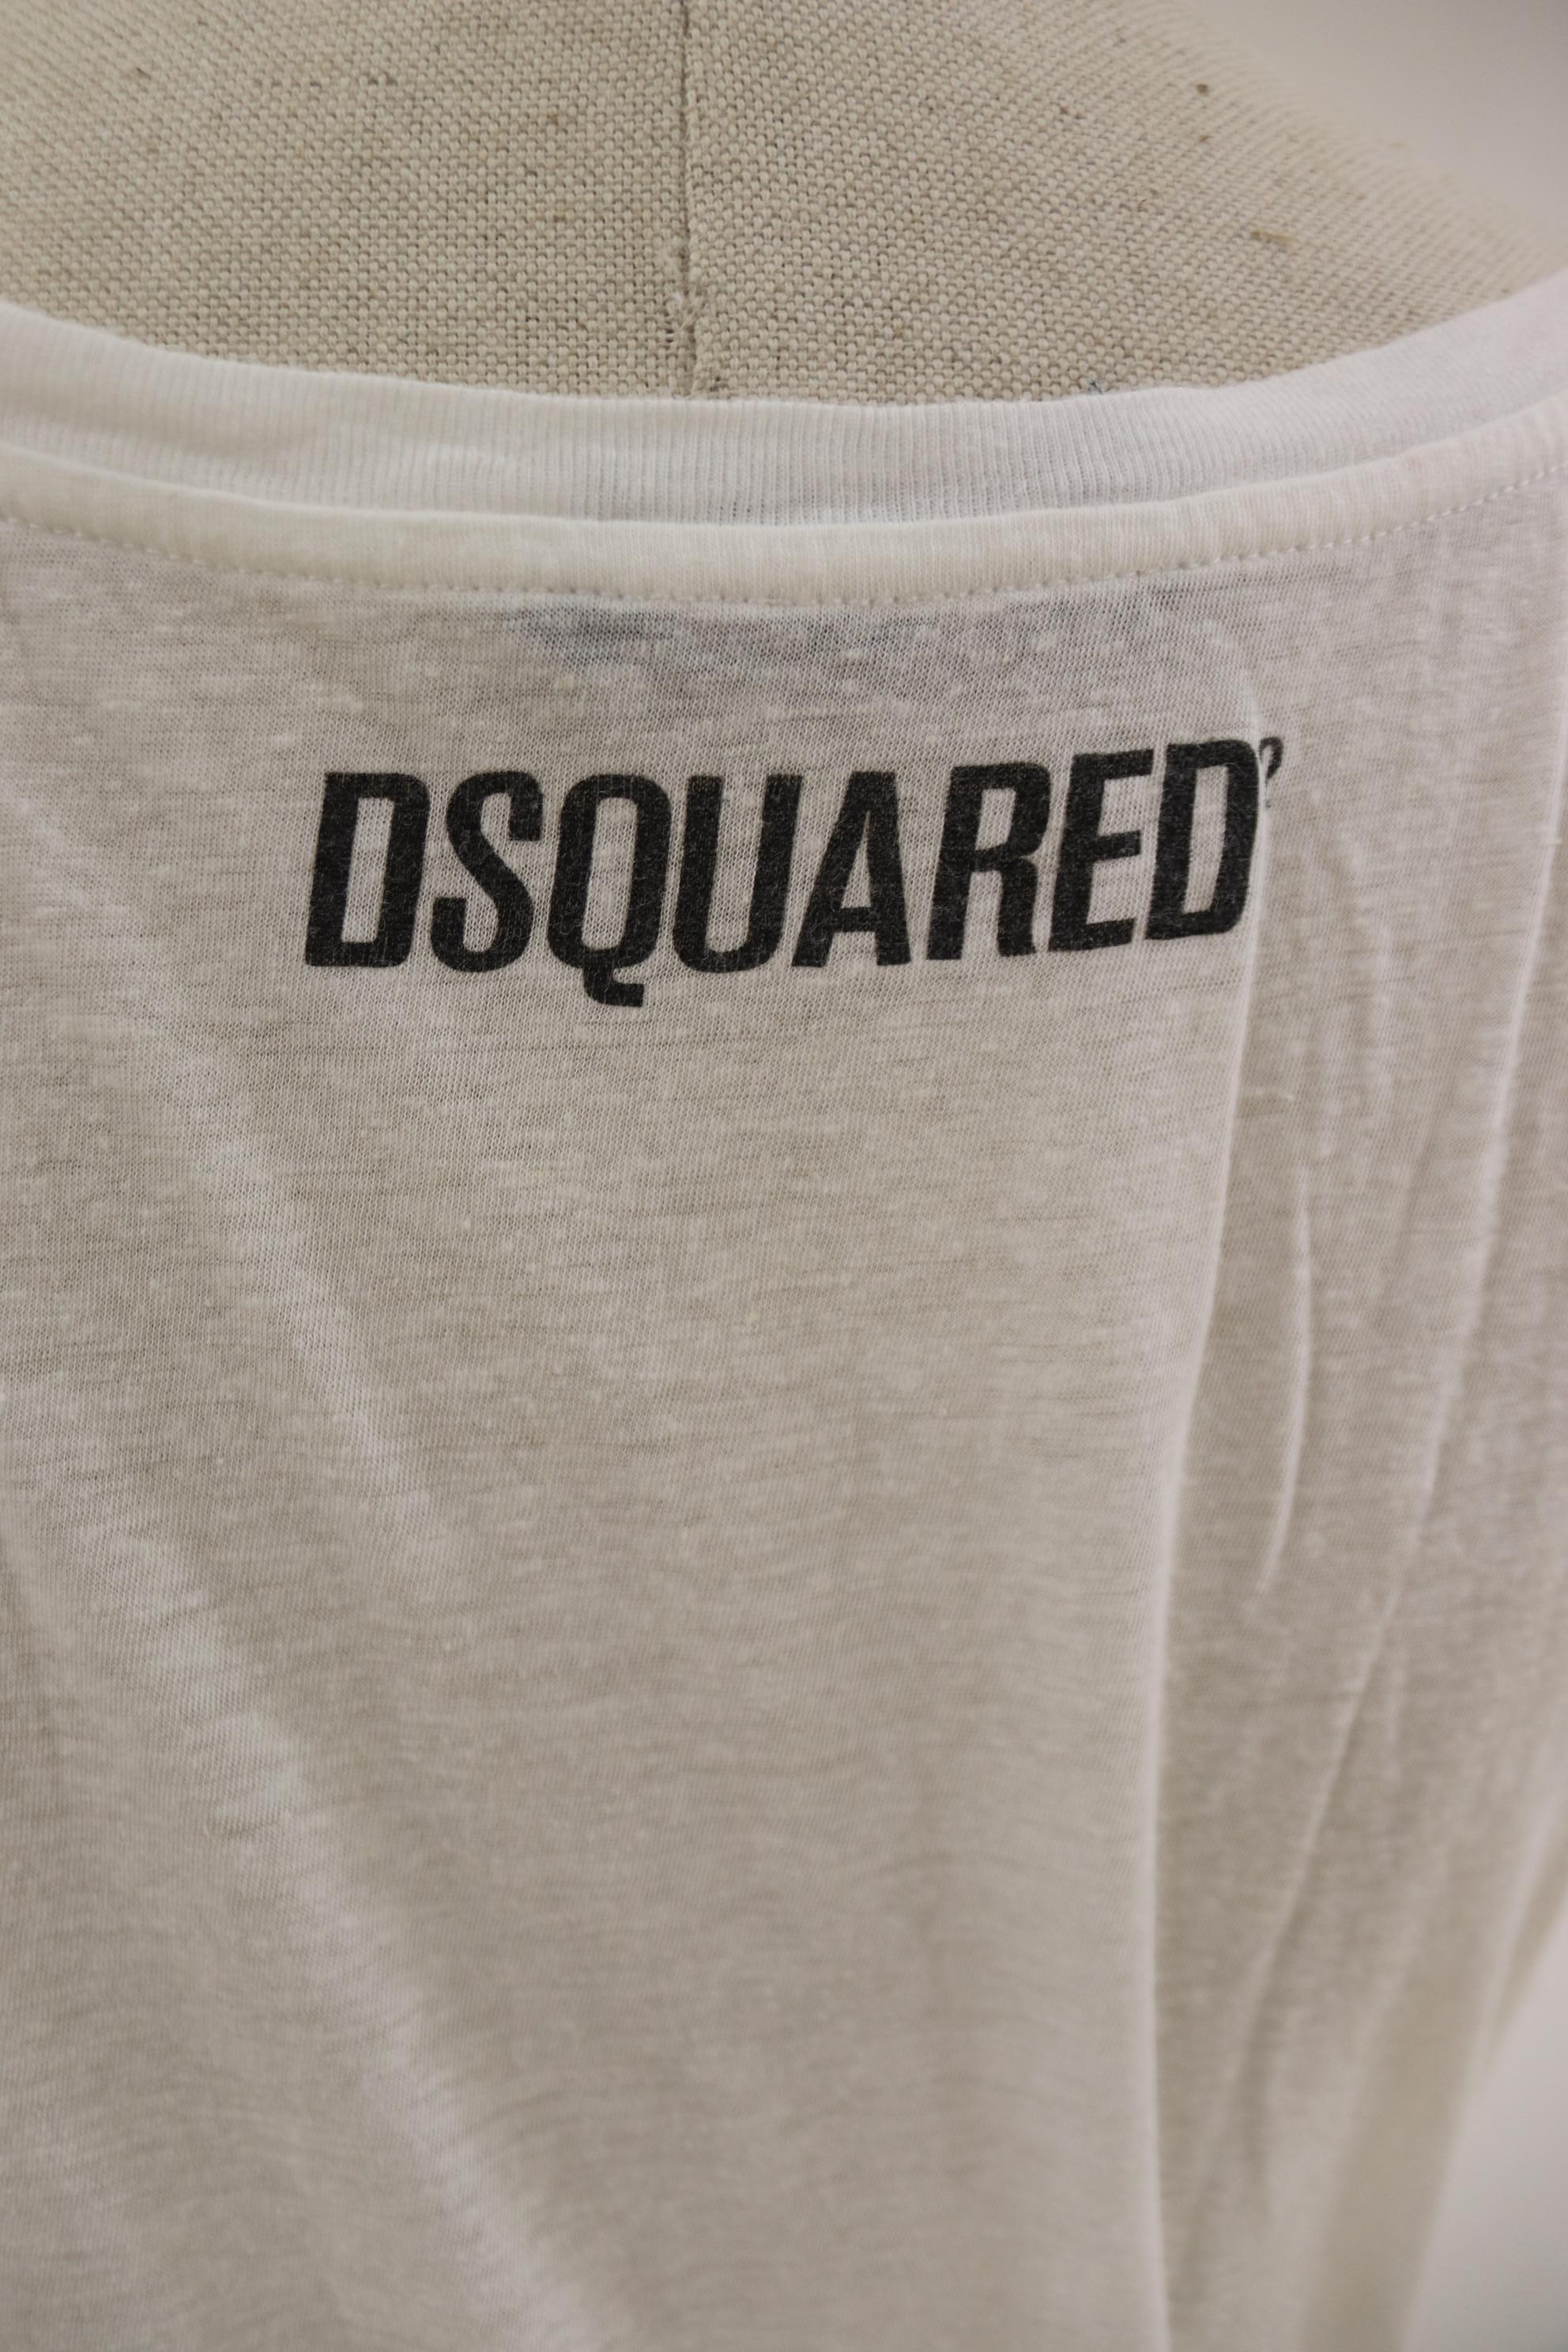 Women's Dsquared dancing days t-shirt For Sale